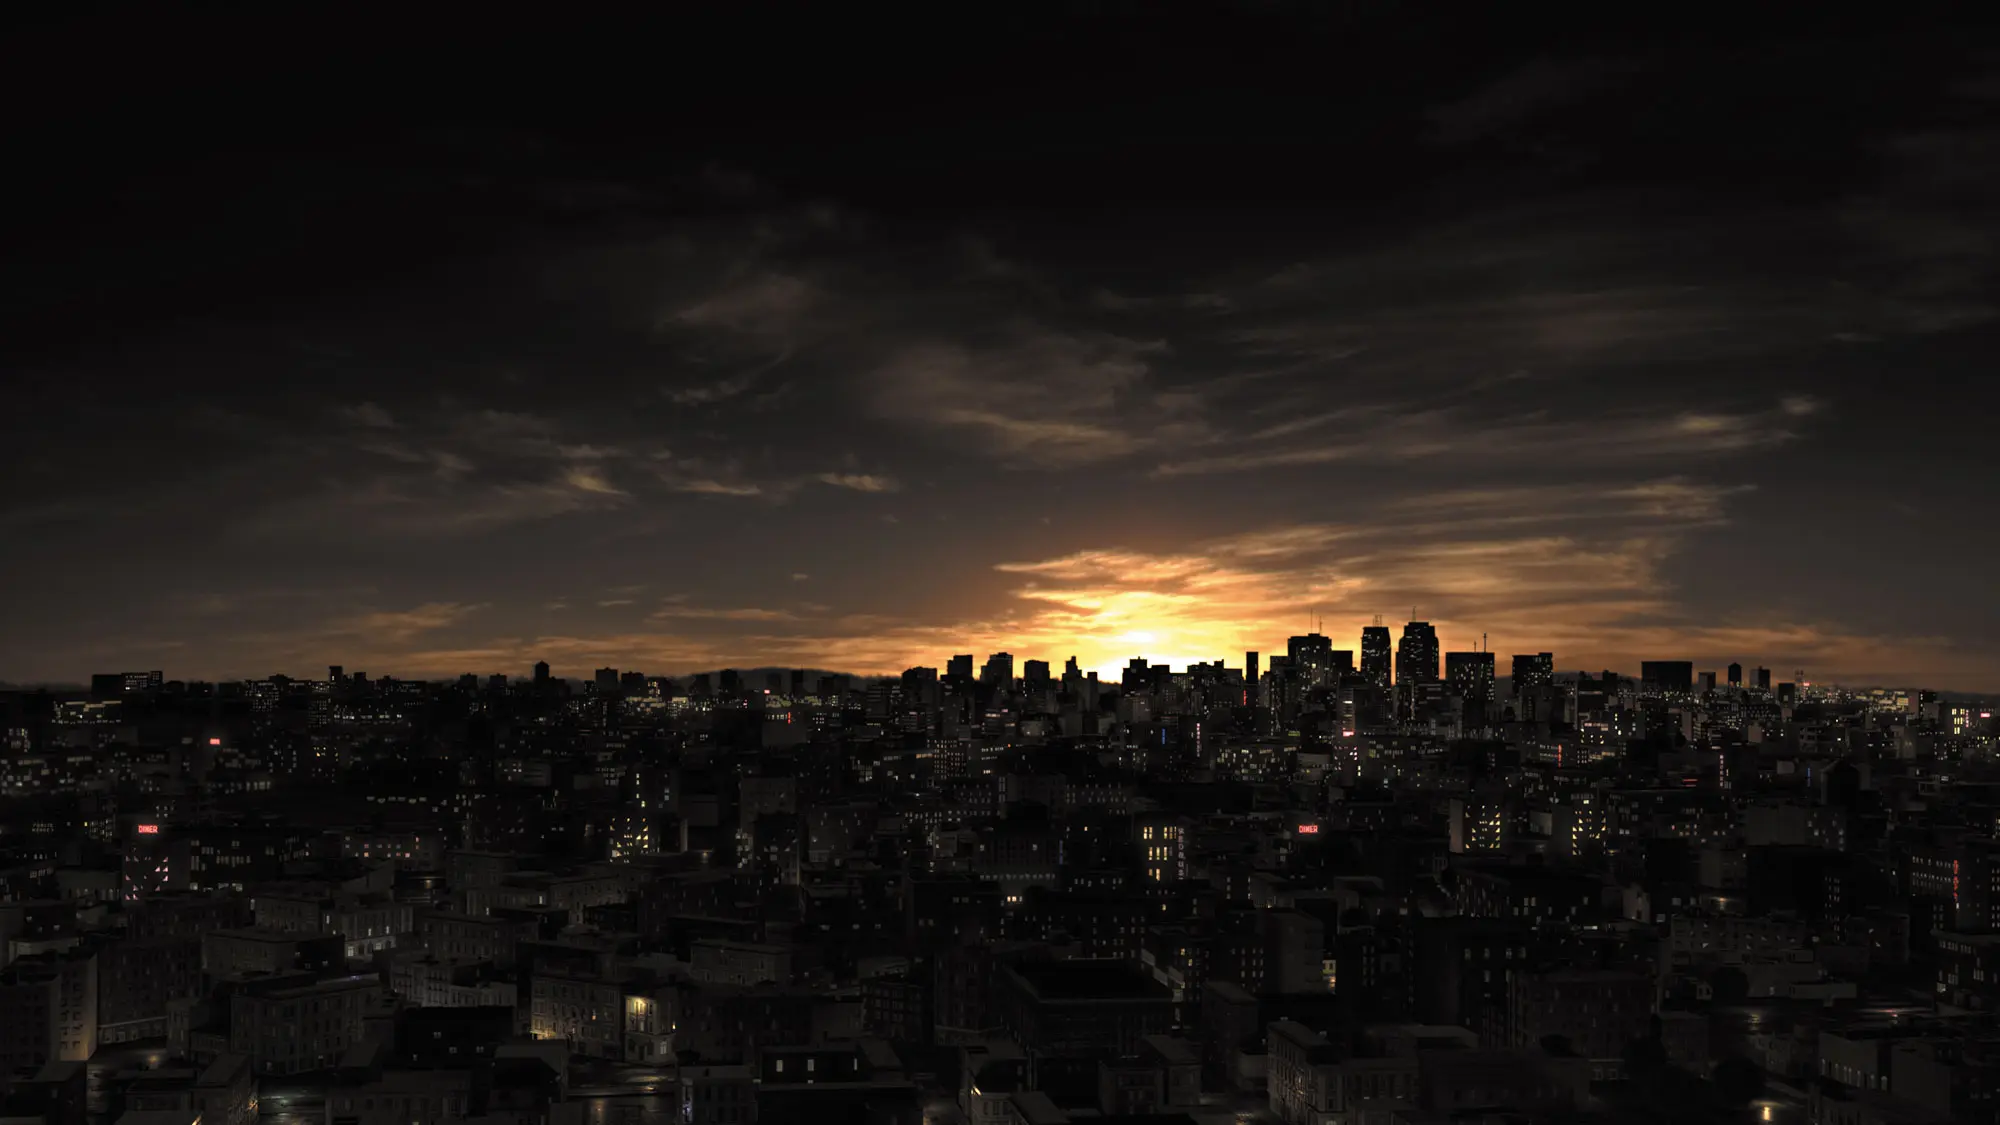 racoon city from RE2